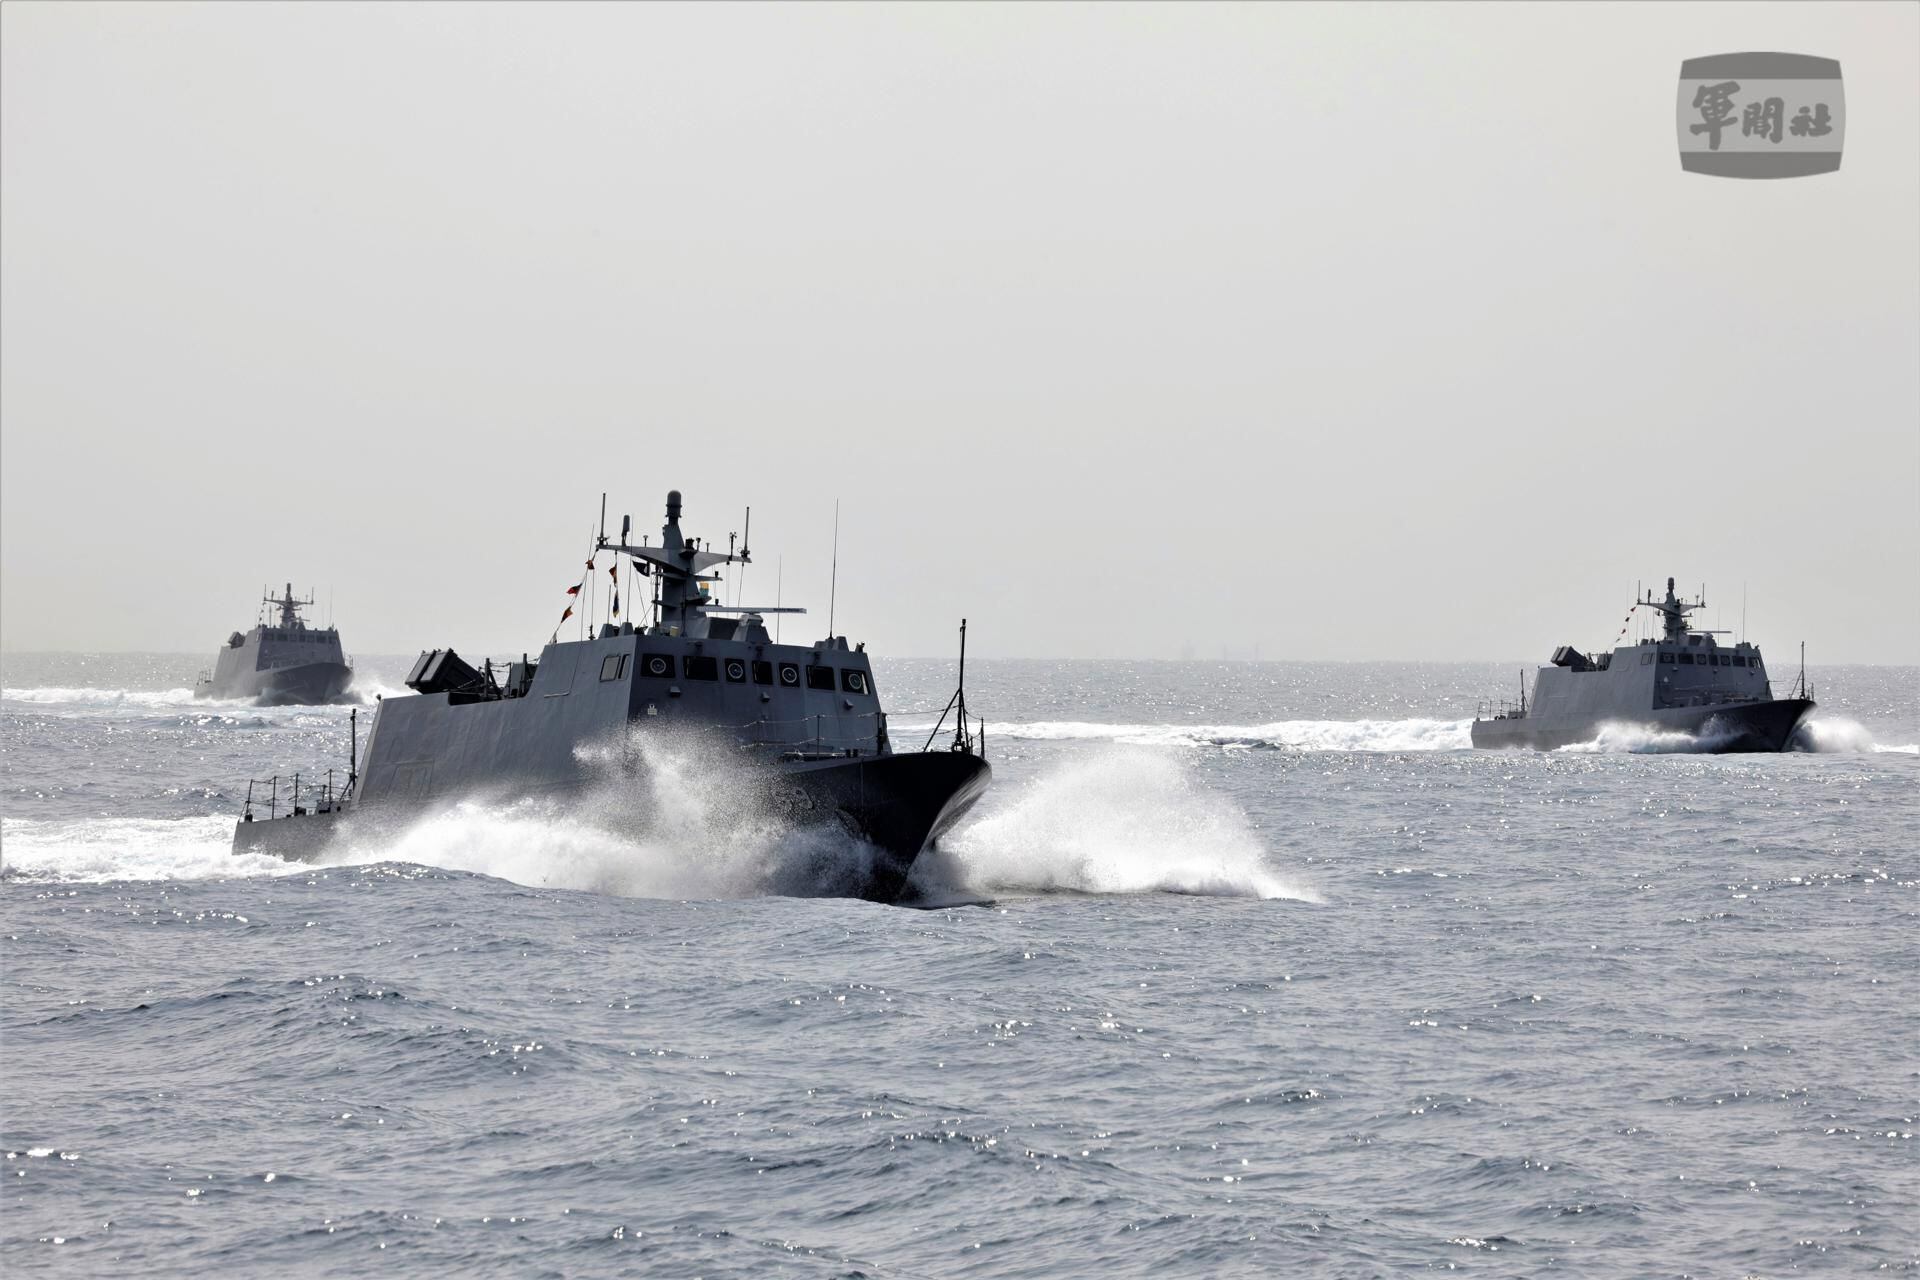 A photo provided by Taiwan's Ministry of Defense shows FACG (Fast Attack Craft, Guided Missile) ships of the Taiwan Navy sailing in an undisclosed location, on April 10, 2023. (EFE).